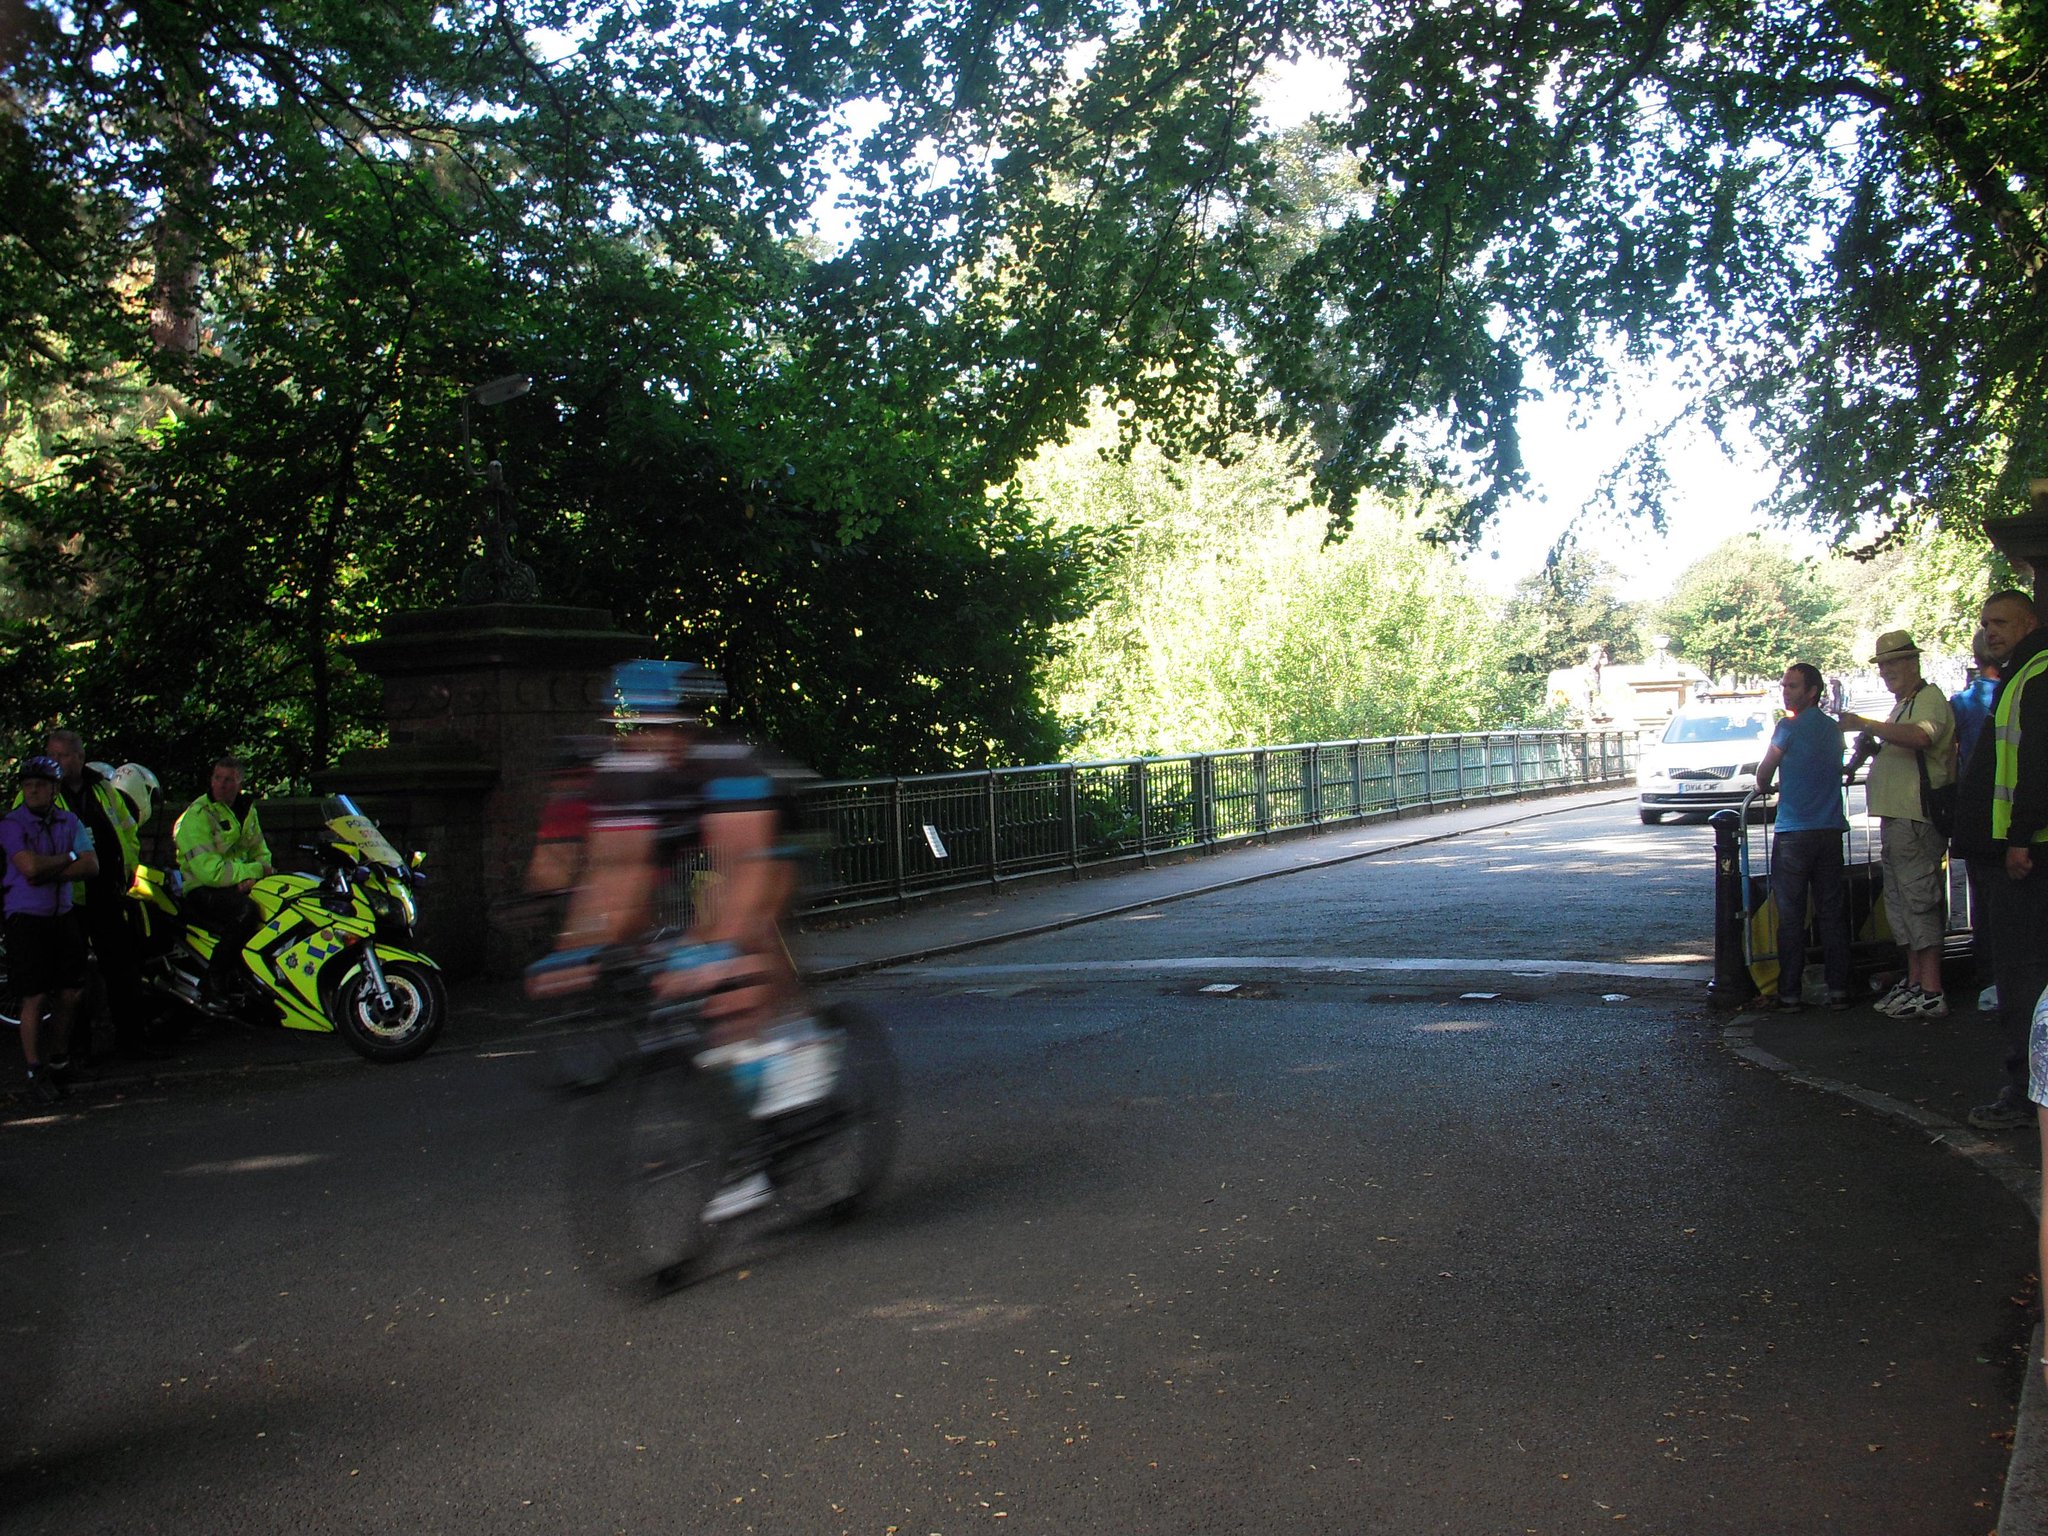 Happy Birthday to Sir Bradley Wiggins Here he is at Liverpool\s Sefton Park! 